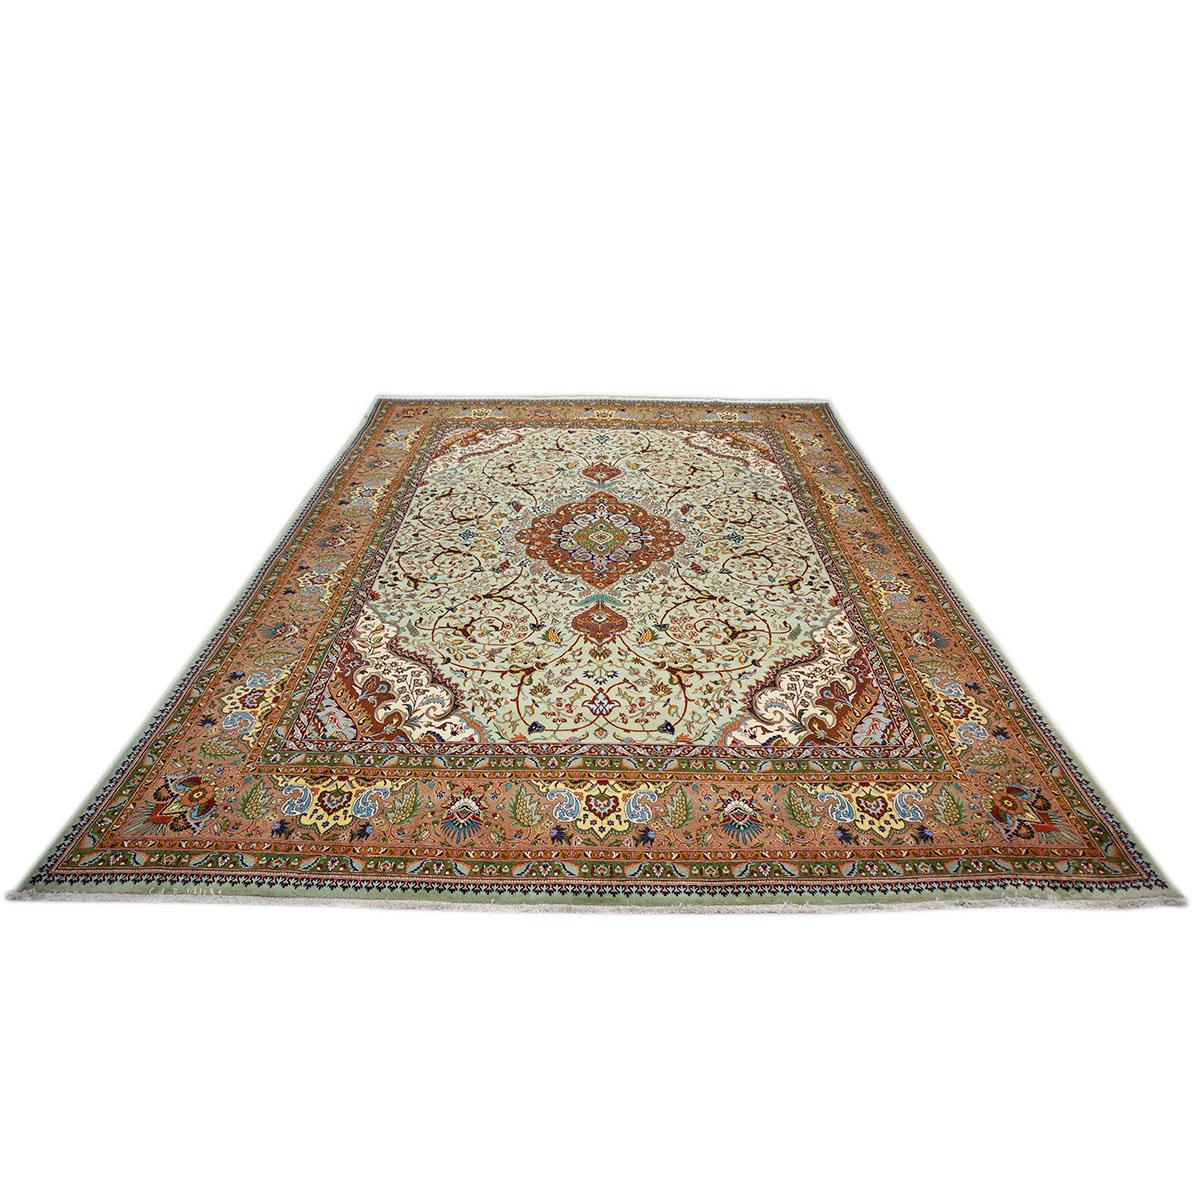  Ashly Fine Rugs presents a 1930s Antique Persian Tabriz 9x13 Wool Handmade Rug. Tabriz is a northern city in modern-day Iran and has forever been famous for the fineness and craftsmanship of its handmade rugs.

 This rug has a wonderful light